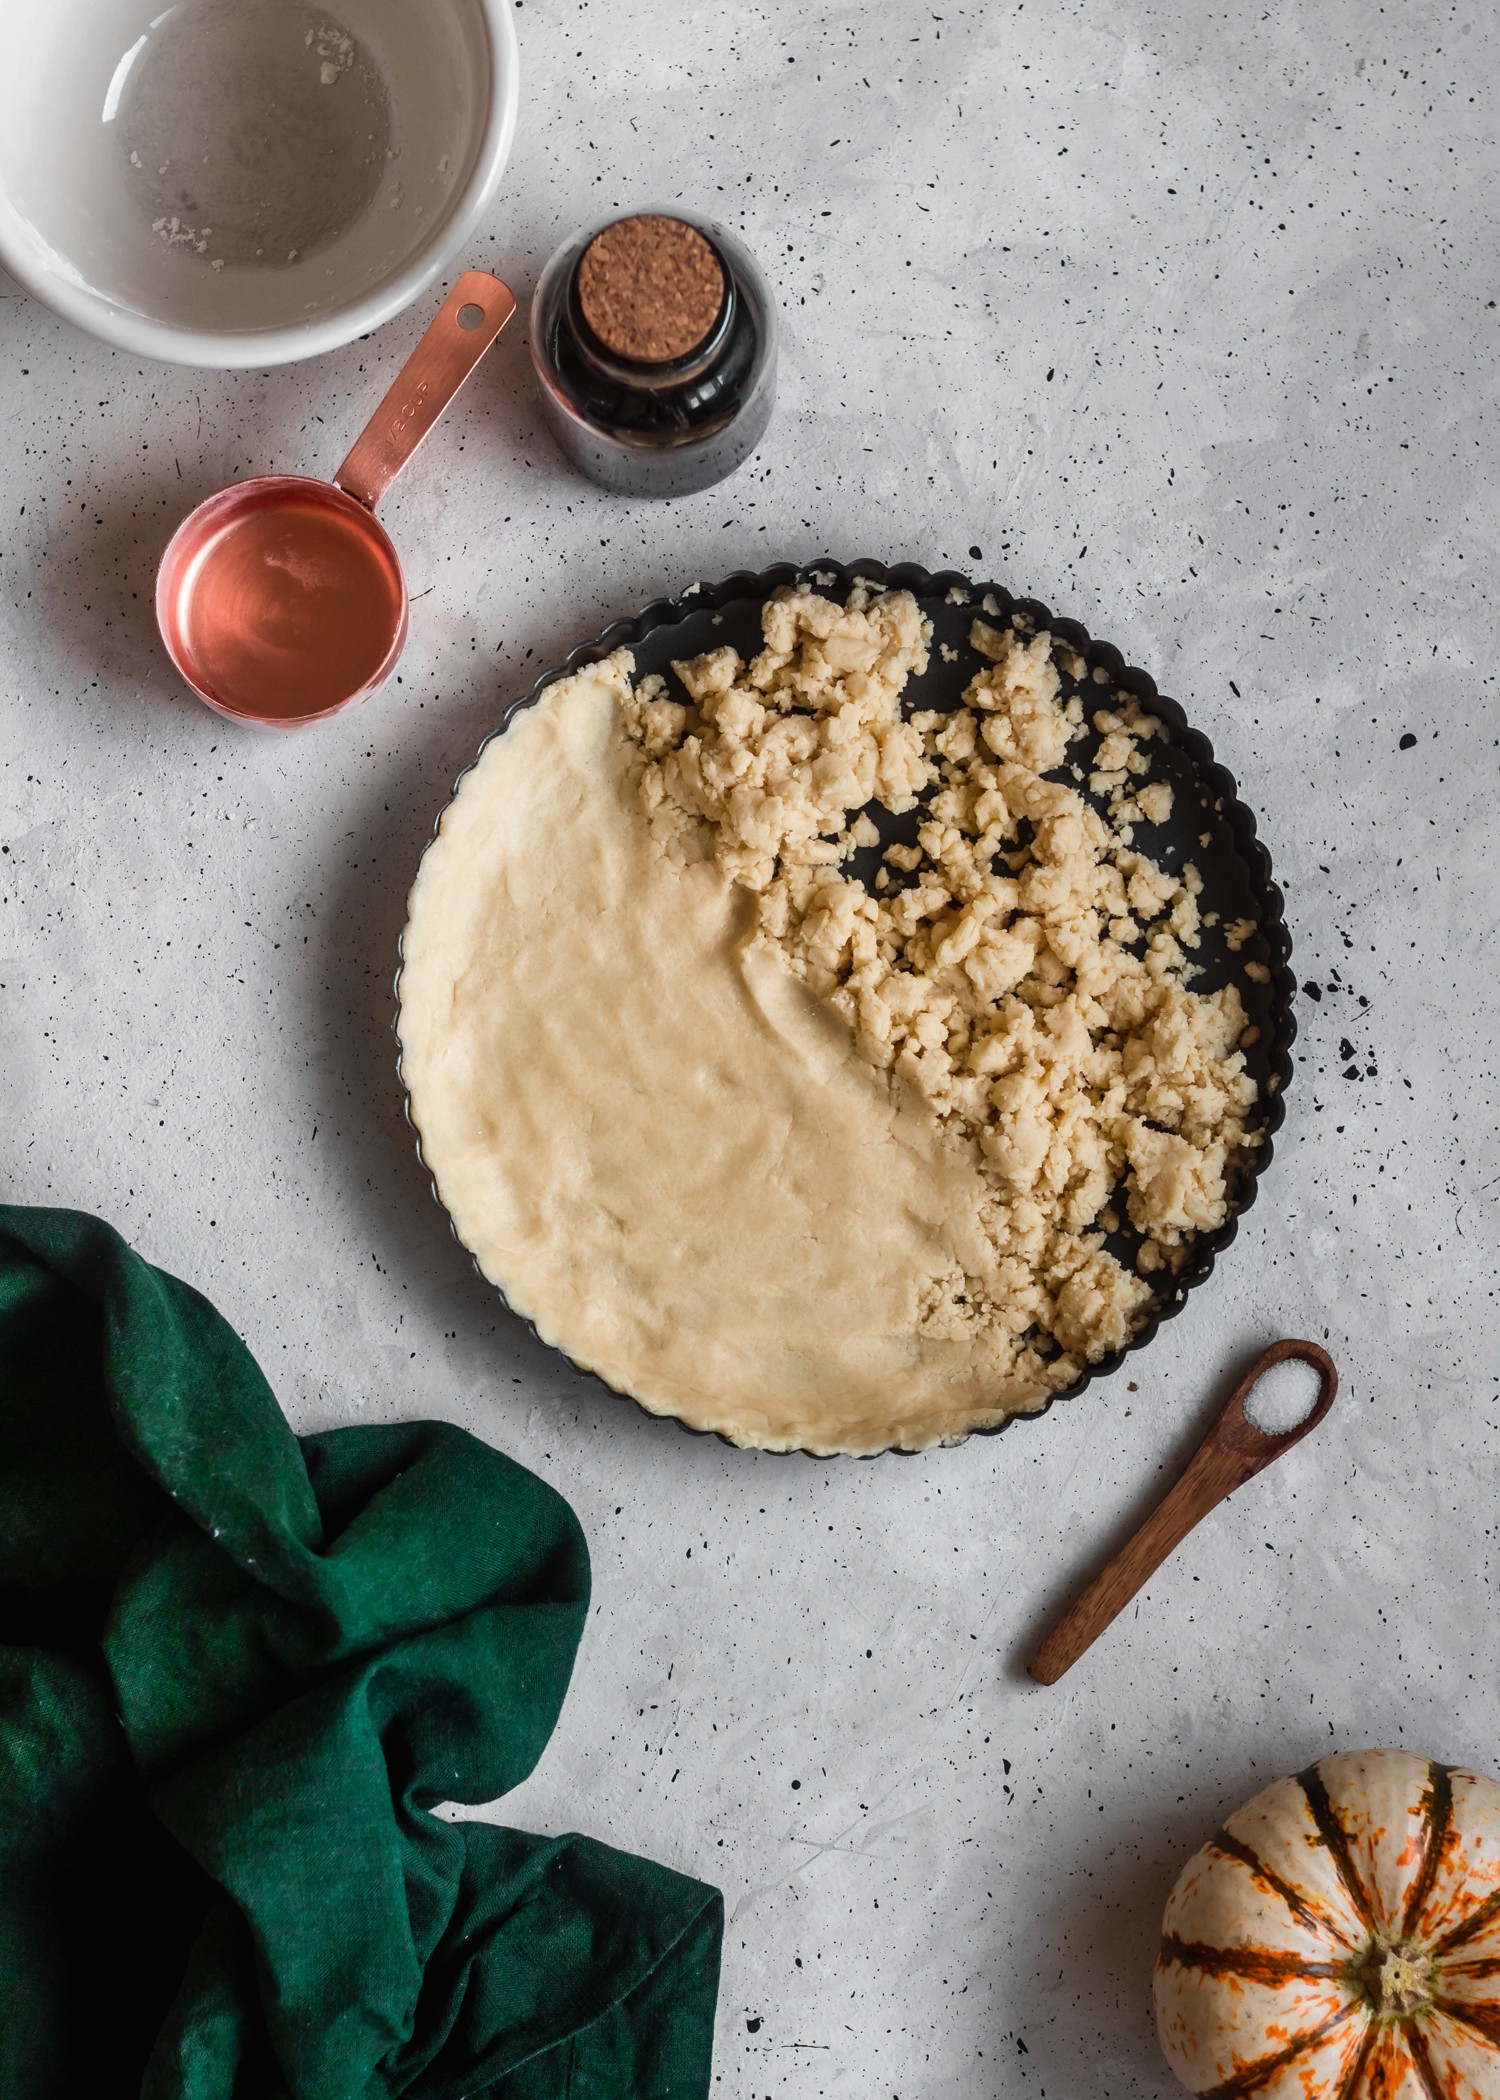 A bird's eye view of a shortbread crust in a black tart pan placed on a grey counter next to a green towel, wooden spoon, white and orange pumpkin, and copper measuring cup.